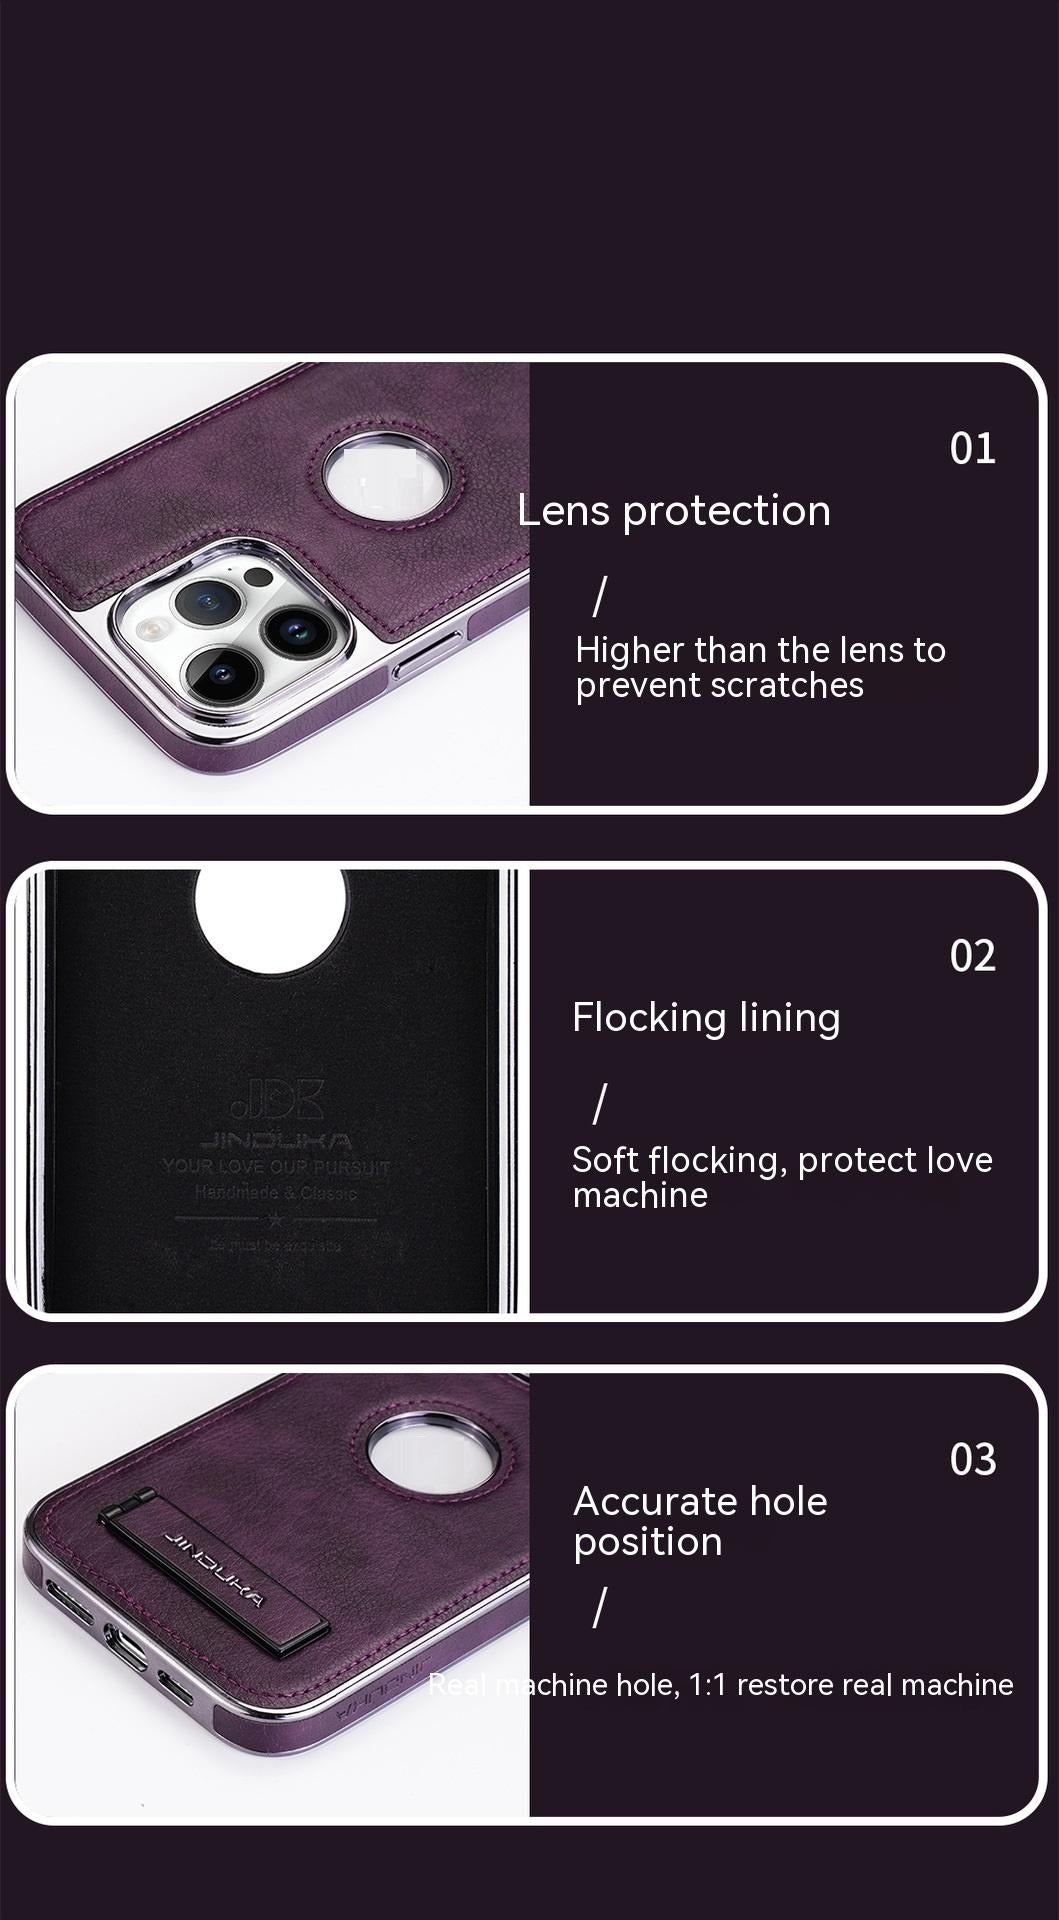 Applicable Phone Case All-inclusive Drop-resistant High-grade Leather Bracket Shell | Phone Case | 
 Product information:
 
 Color: black, brown, navy blue, dark purple, dark green
 
 Applicable mode